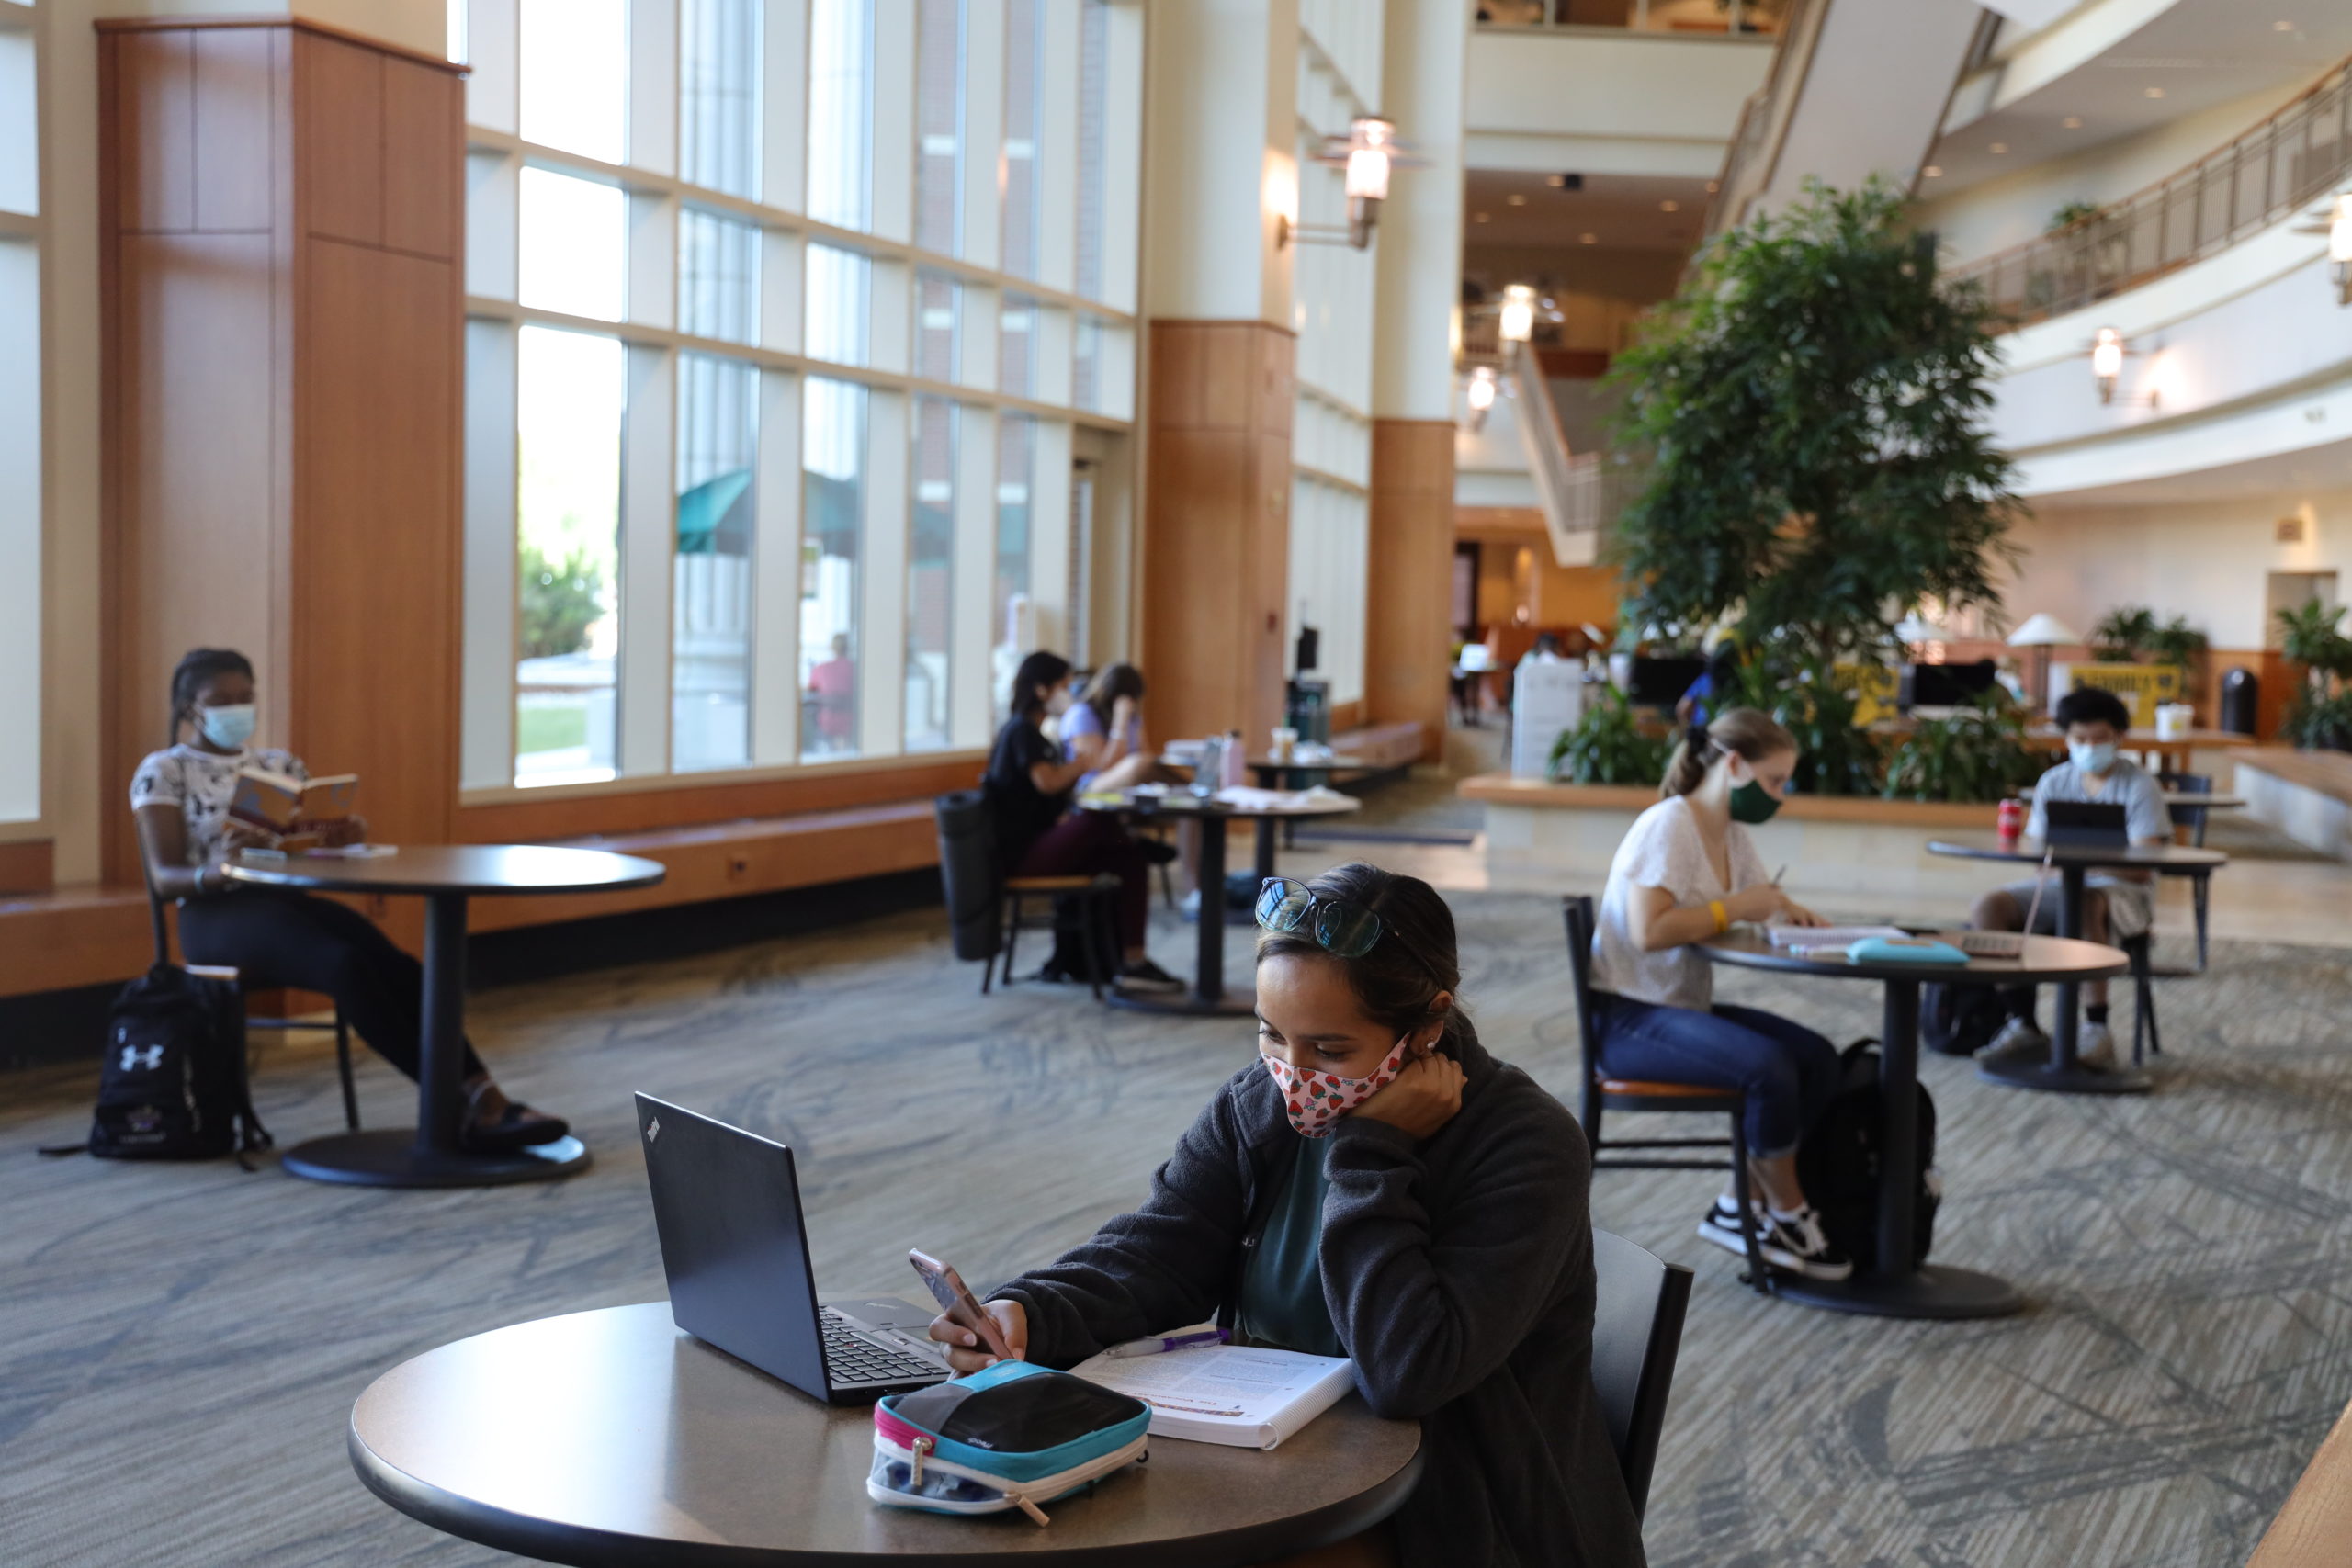 Students studying in the Baylor Sciences Building